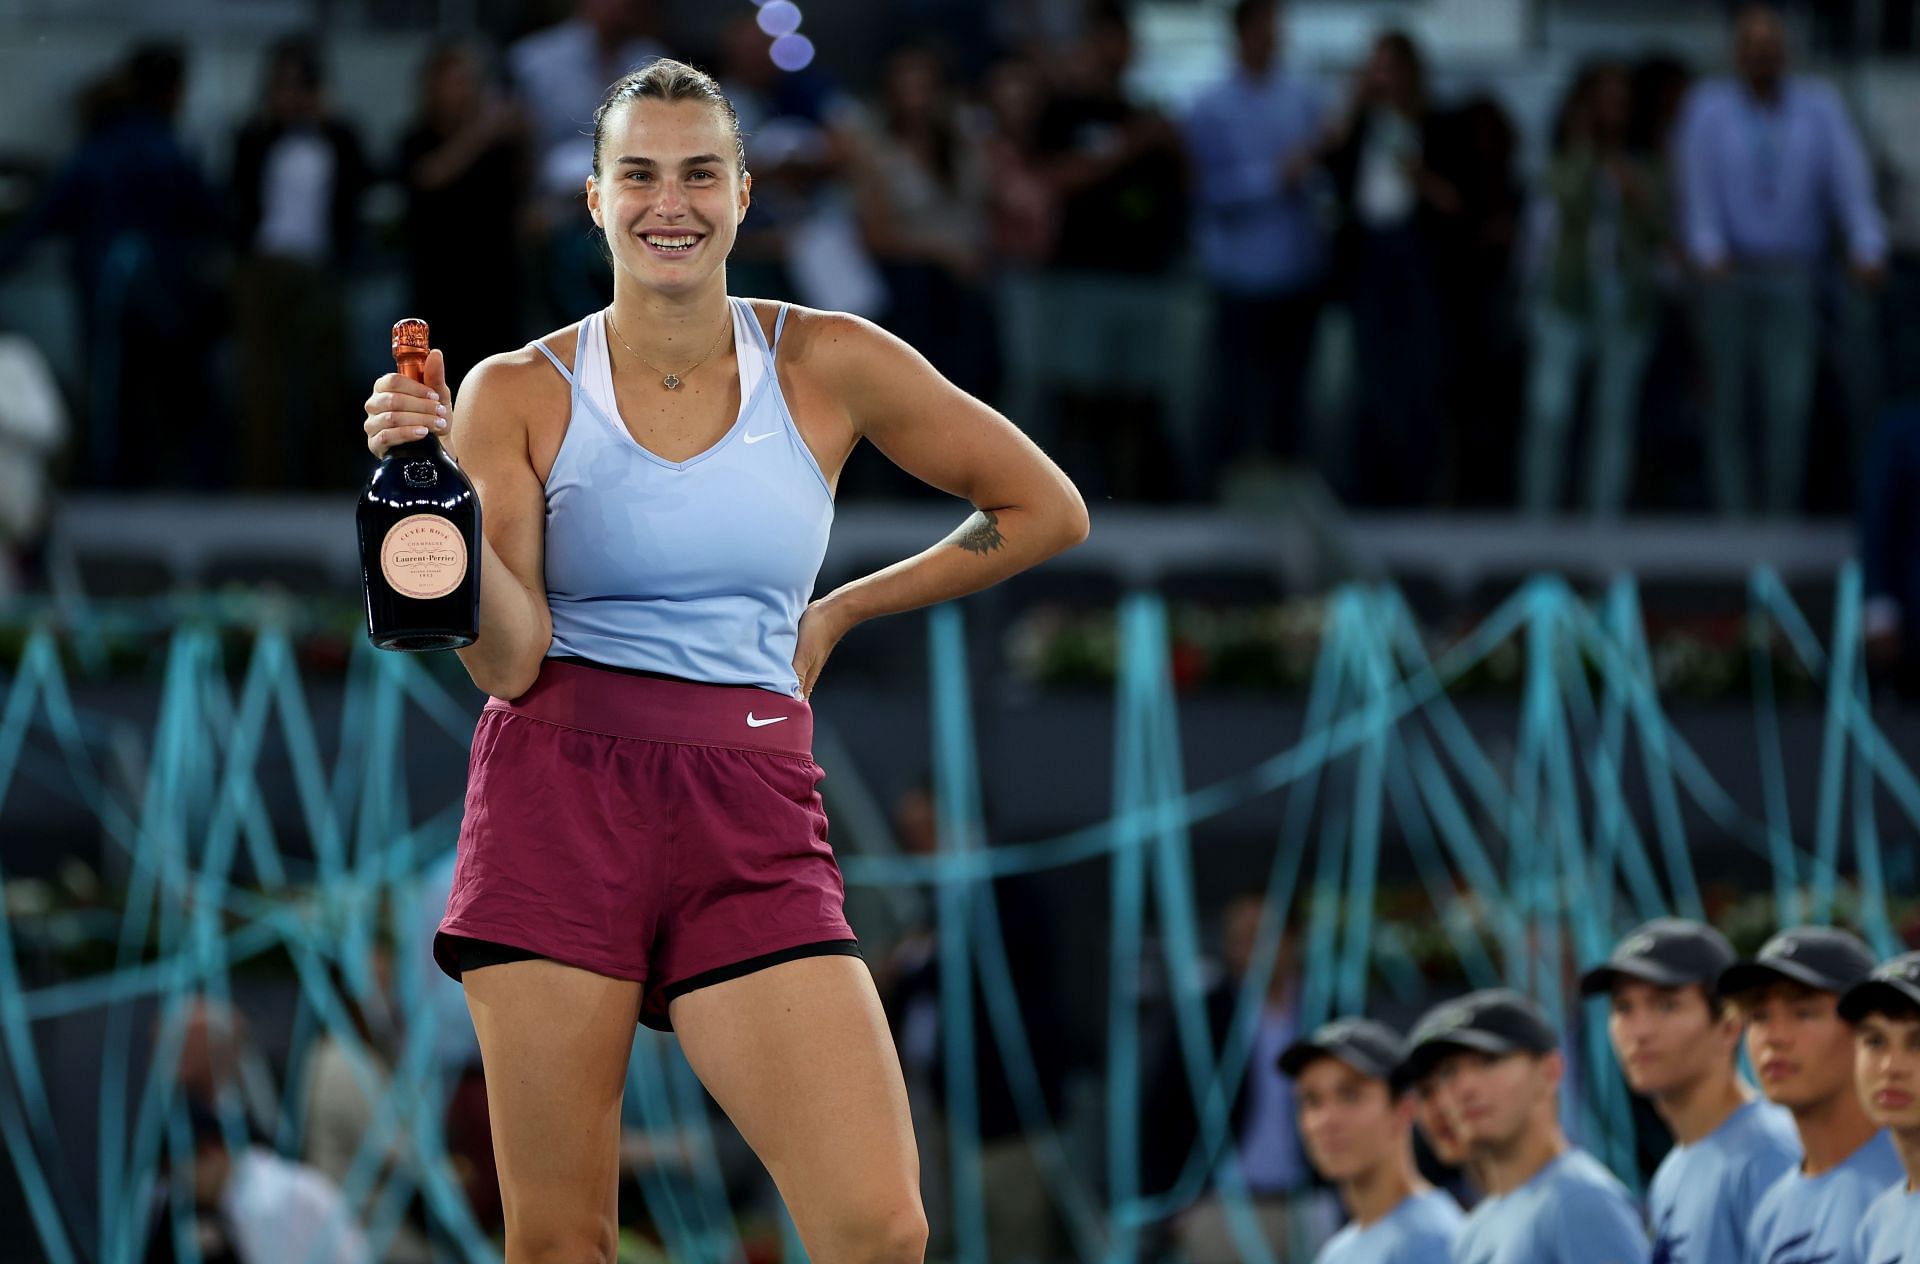 French Open 2023: Is Aryna Sabalenka the title favorite following her win against Iga Swiatek in Madrid?